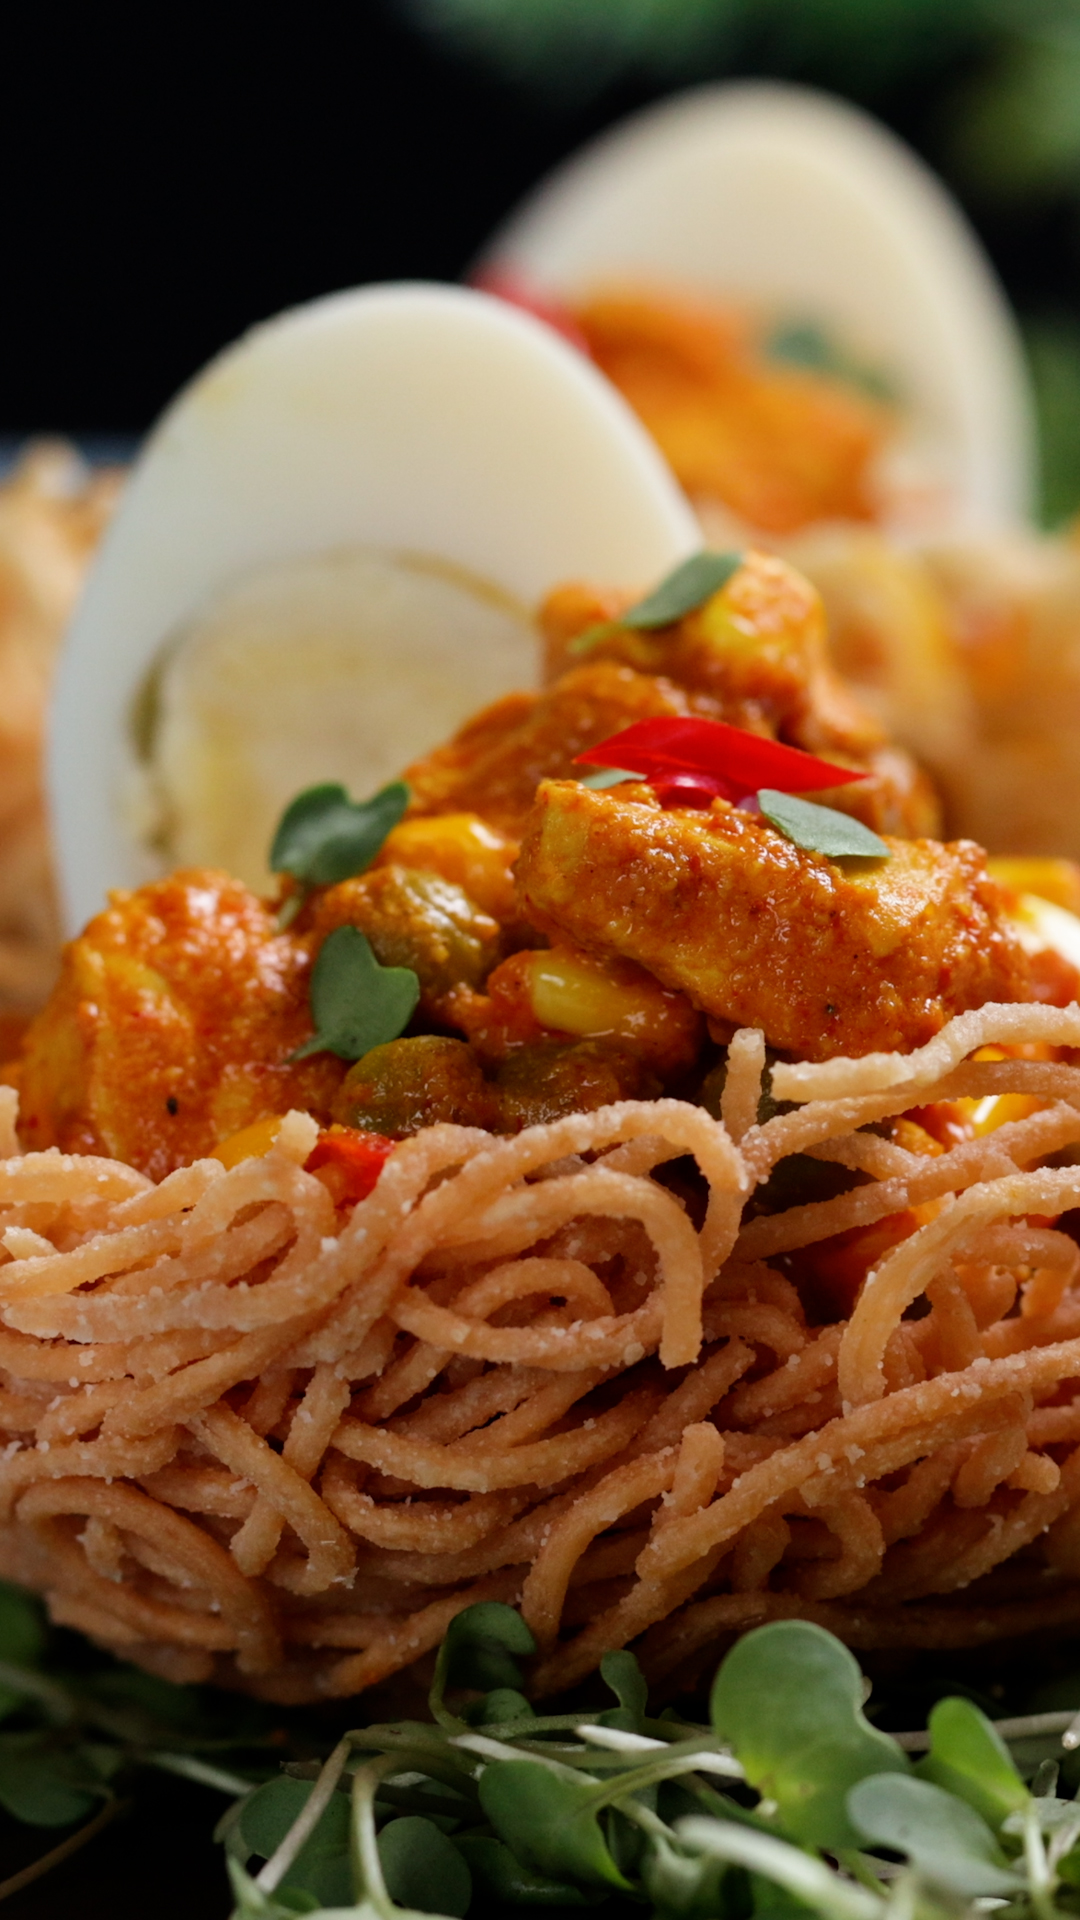 Fried Noodle Nests with Indian Chicken Gravy